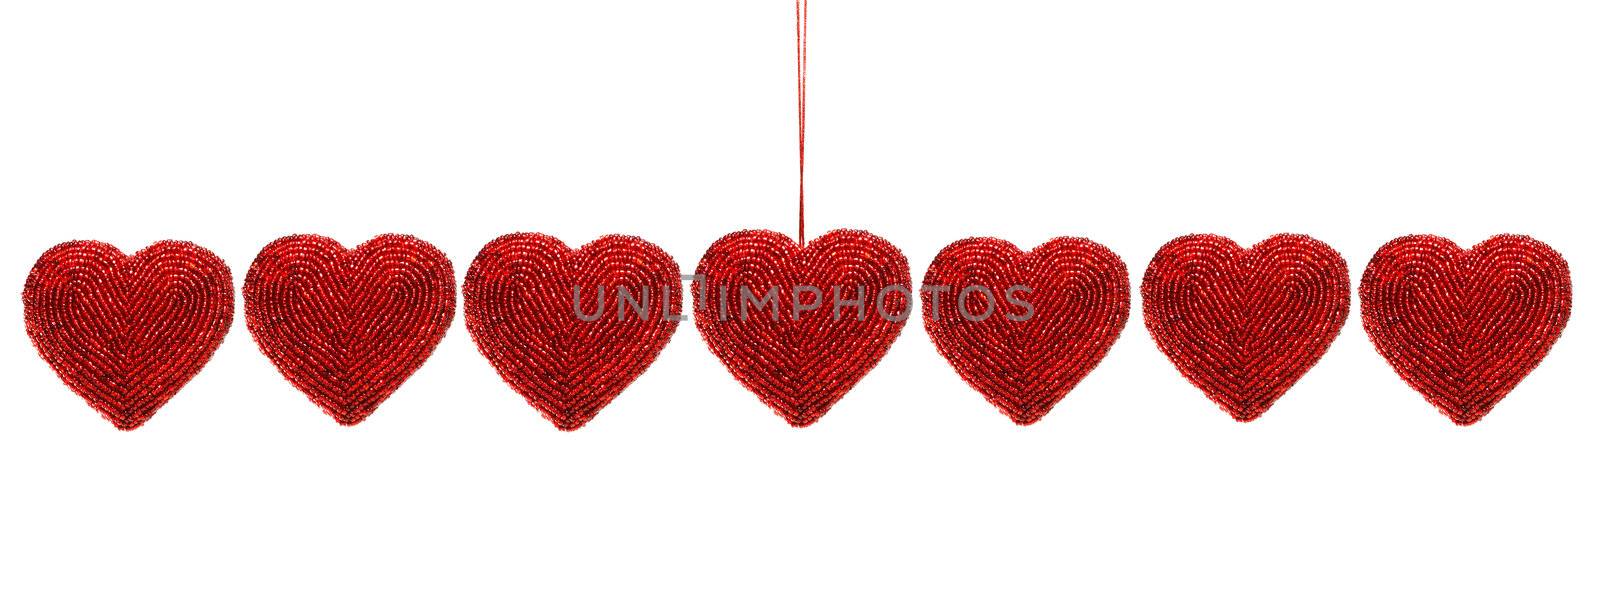 Red beaded hearts isolated against white by Sandralise